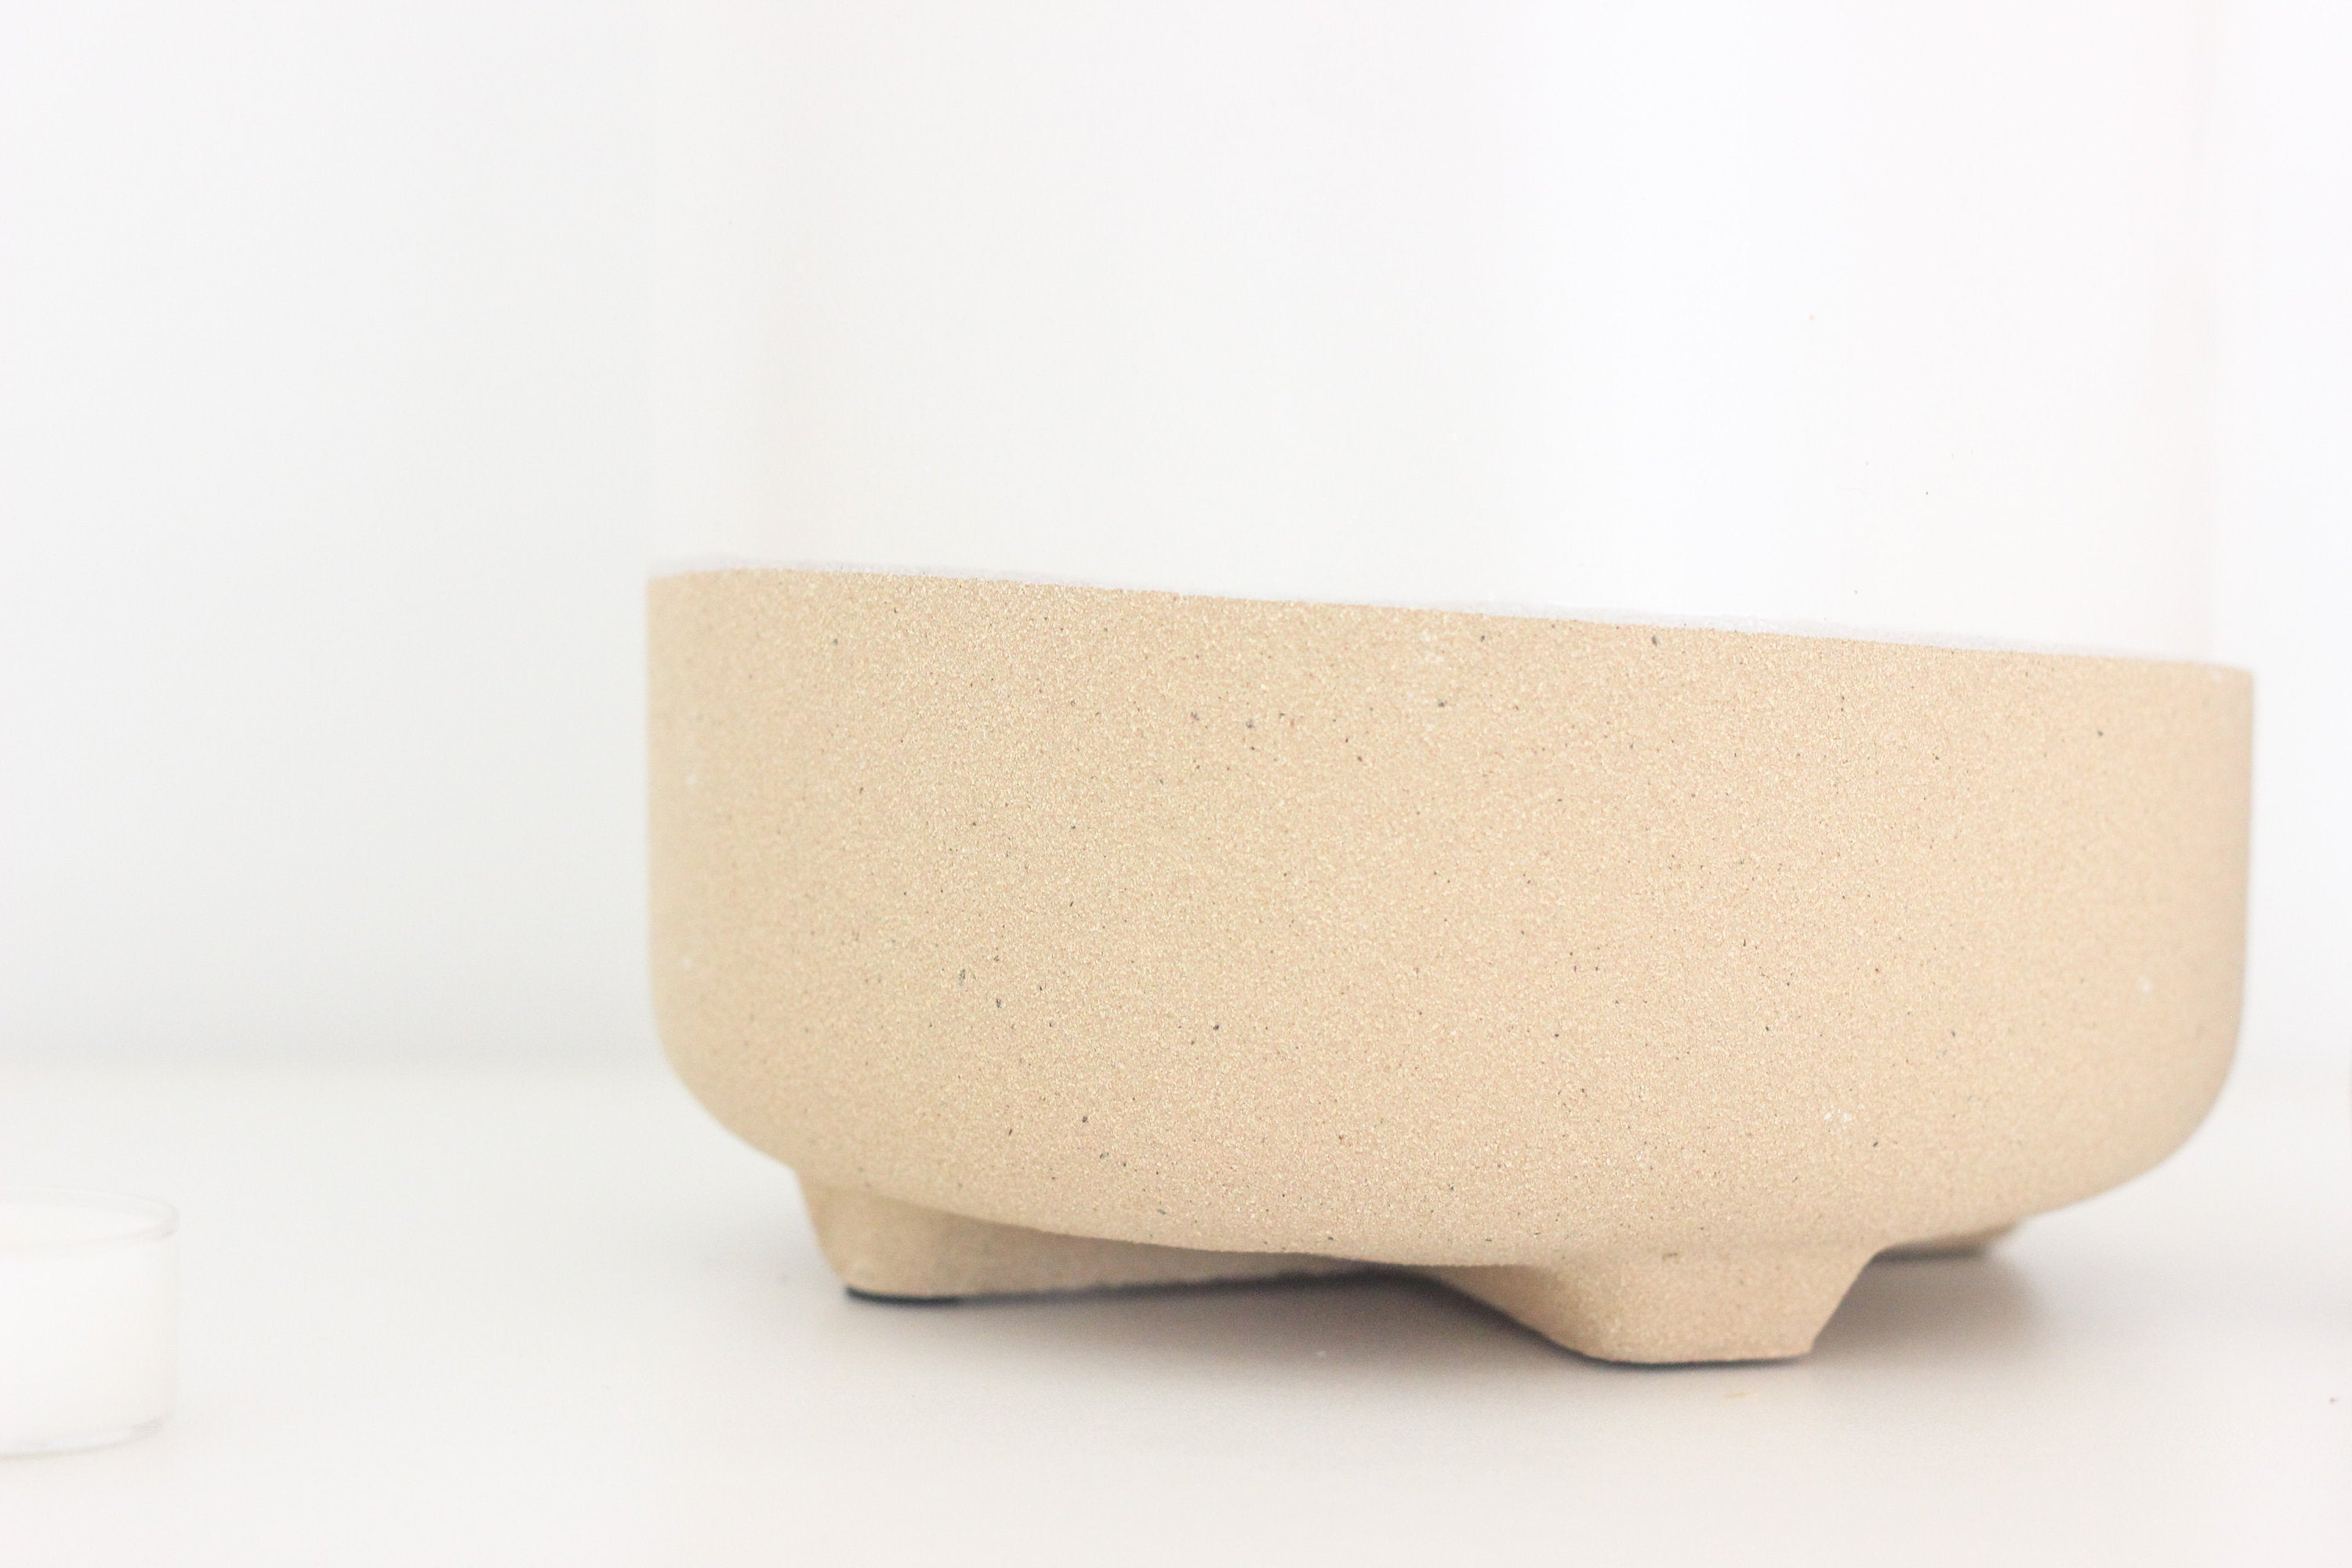 Neutral Matte White and Natural Texture Minimal Footed Planter Pot